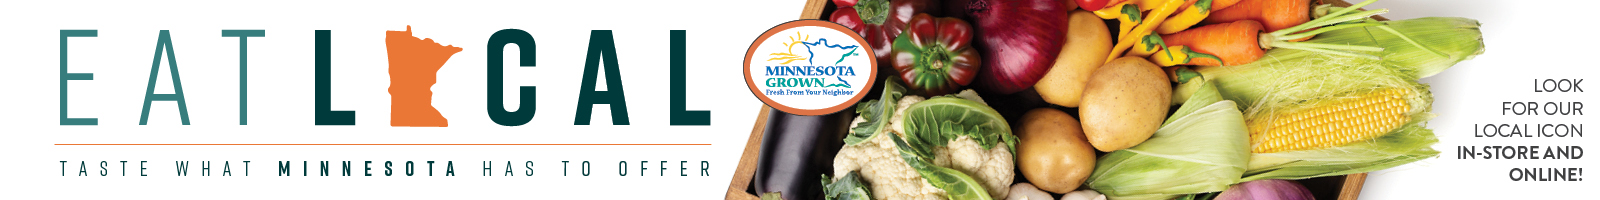 Eat Local: Taste What Minnesota Has To Offer. Local for Our Local Icon In-Store and Online.